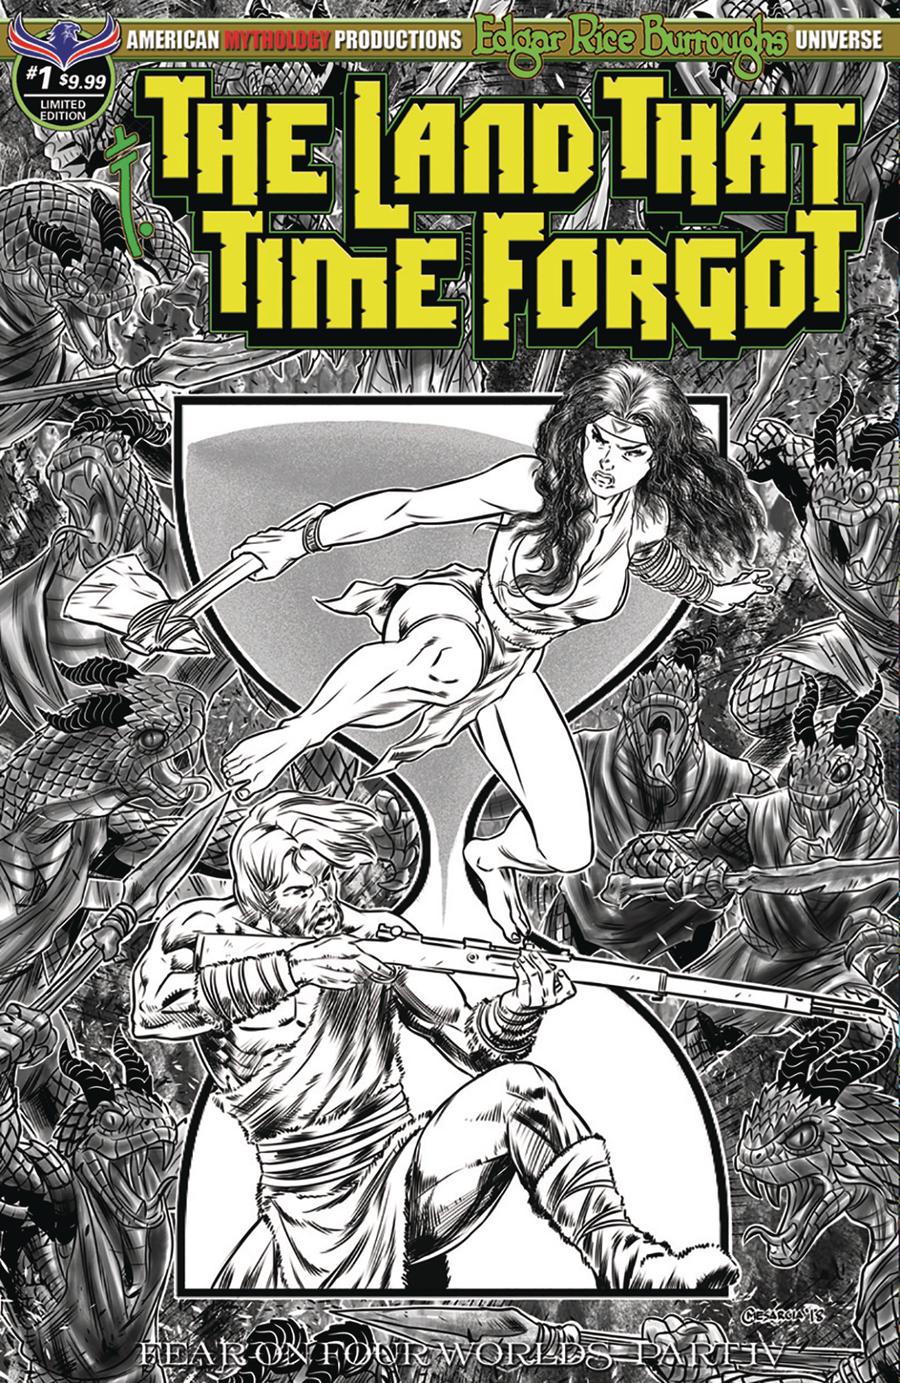 Land That Time Forgot #1 Cover D Limited Edition Cyrus Mesarcia Timeless Black & White Cover (Fear On Four Worlds Part 4)